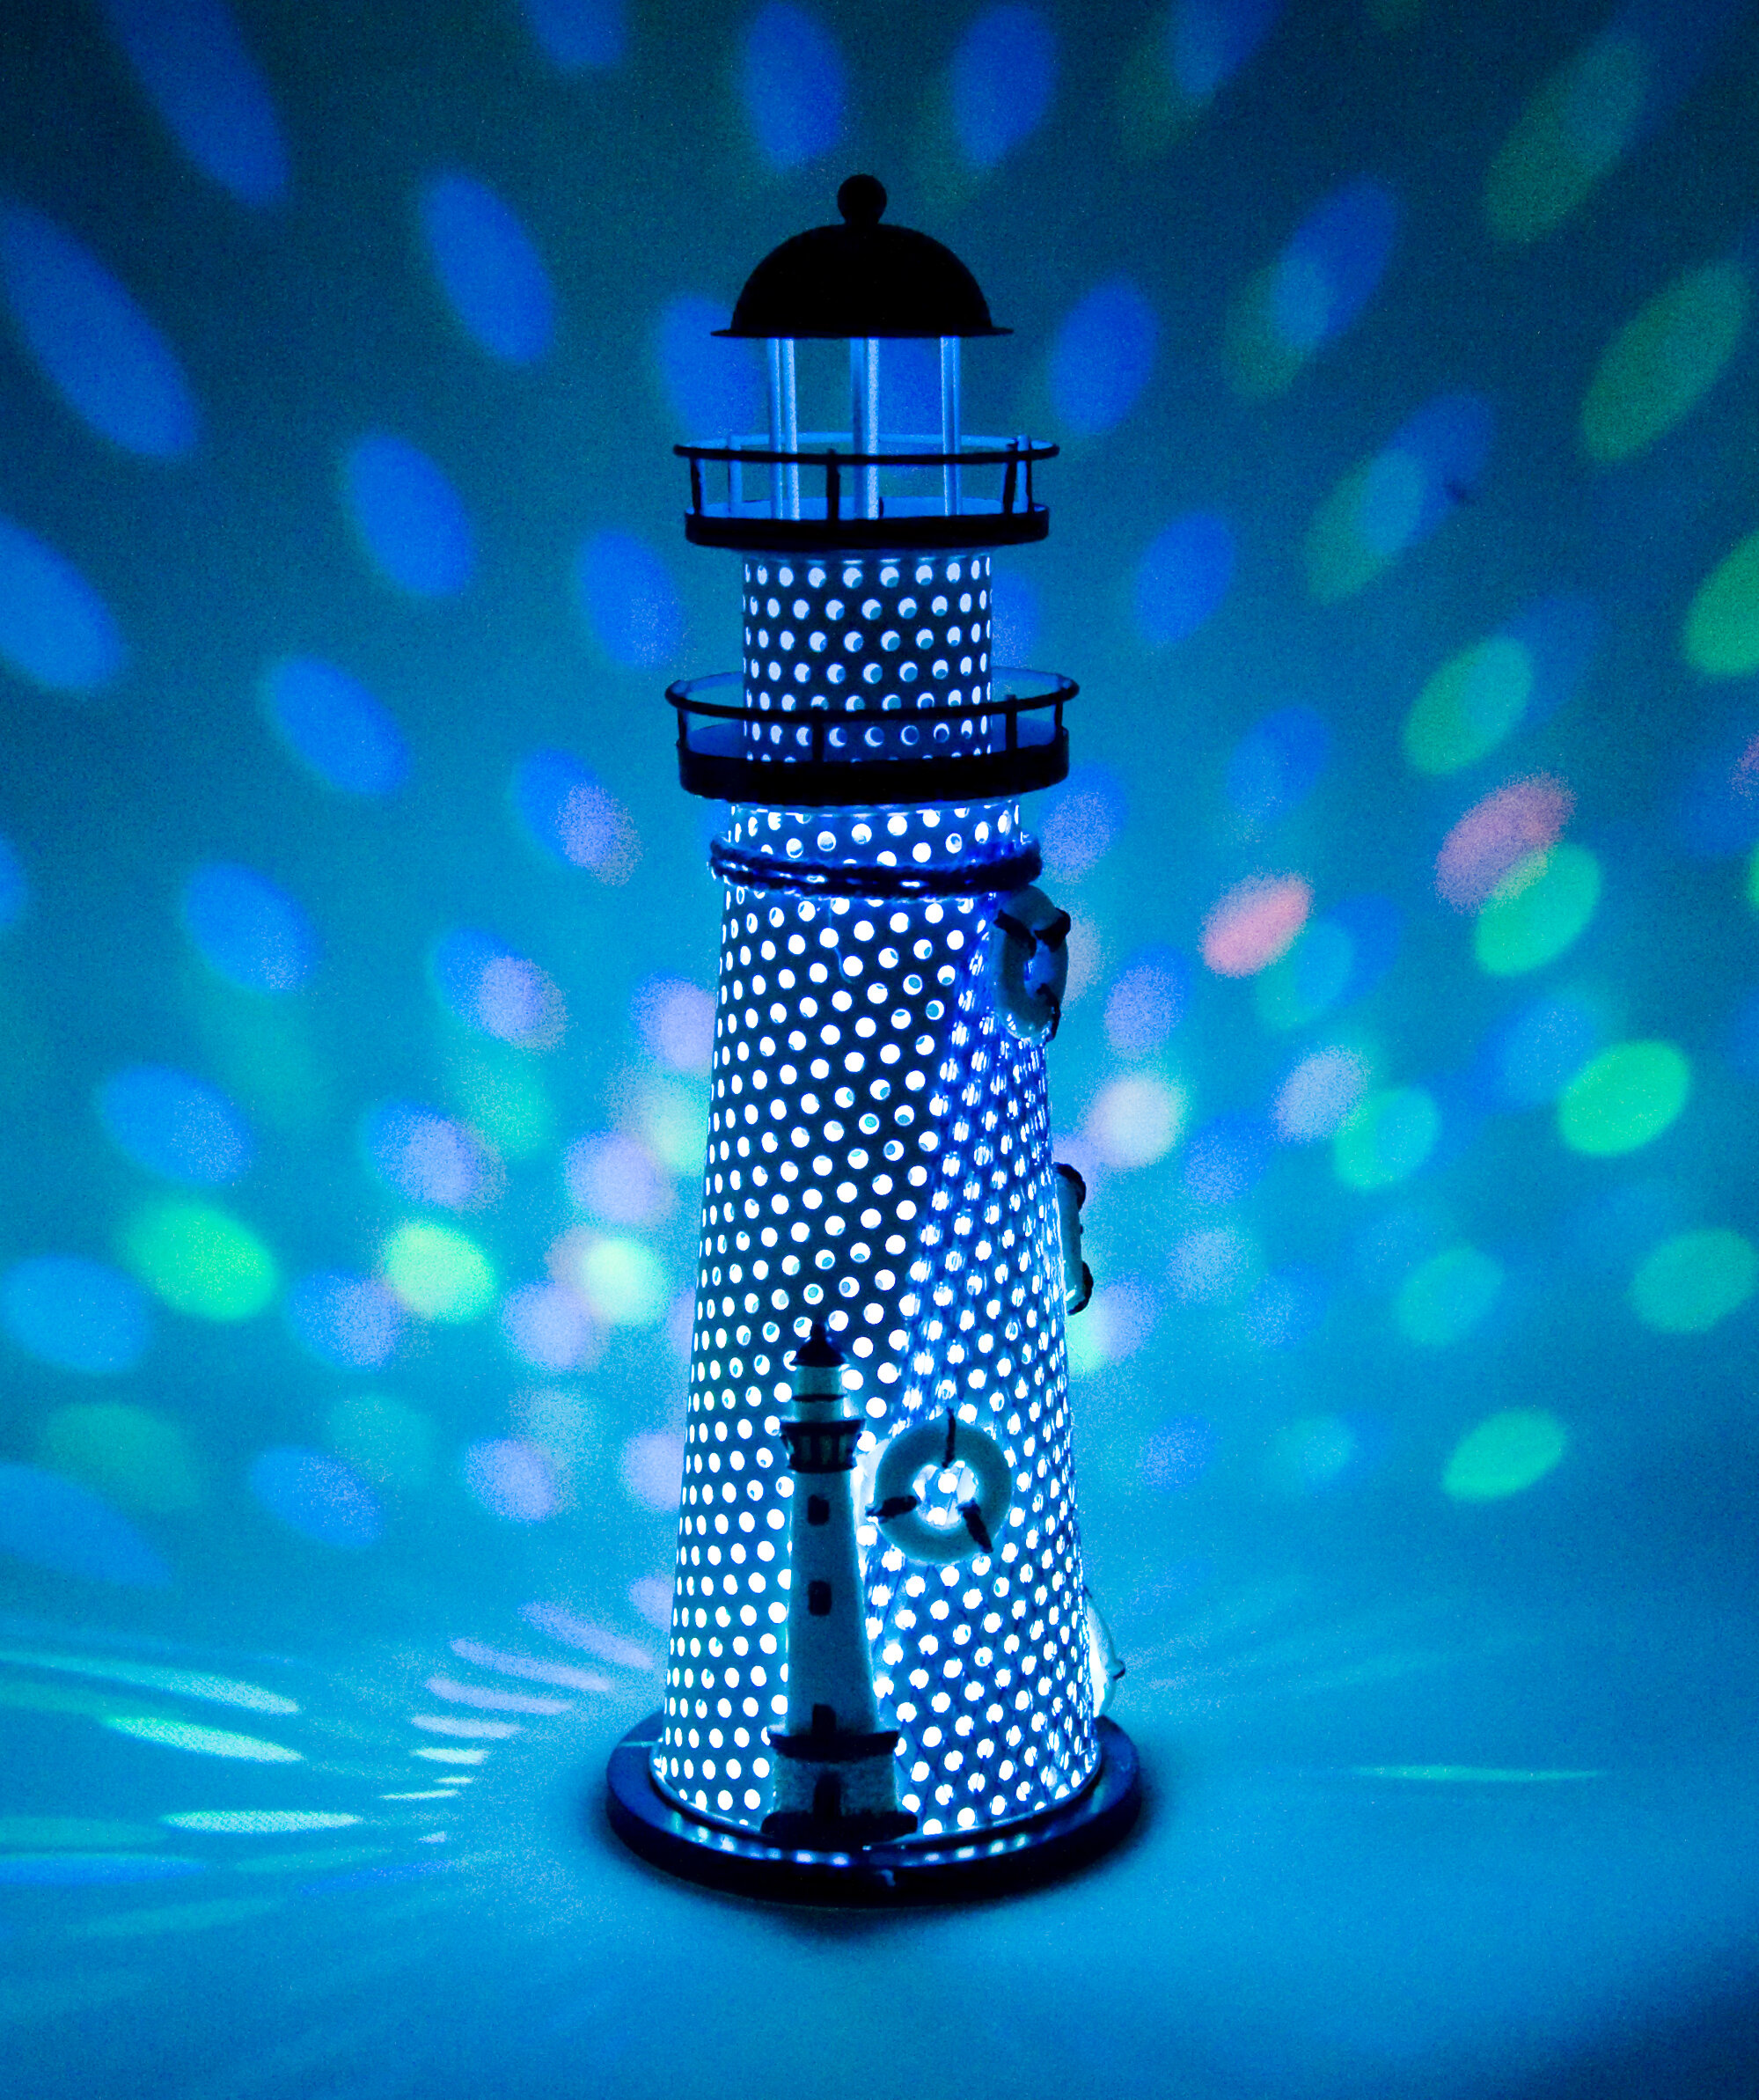 16 Color Options with Remote Great Gift Lighthouse Nautical Light House Night Light Up LED Free Engraved Custom Name Personalized Strength Safety Hope Desk Table Lamp Room Home Decor Its Wow